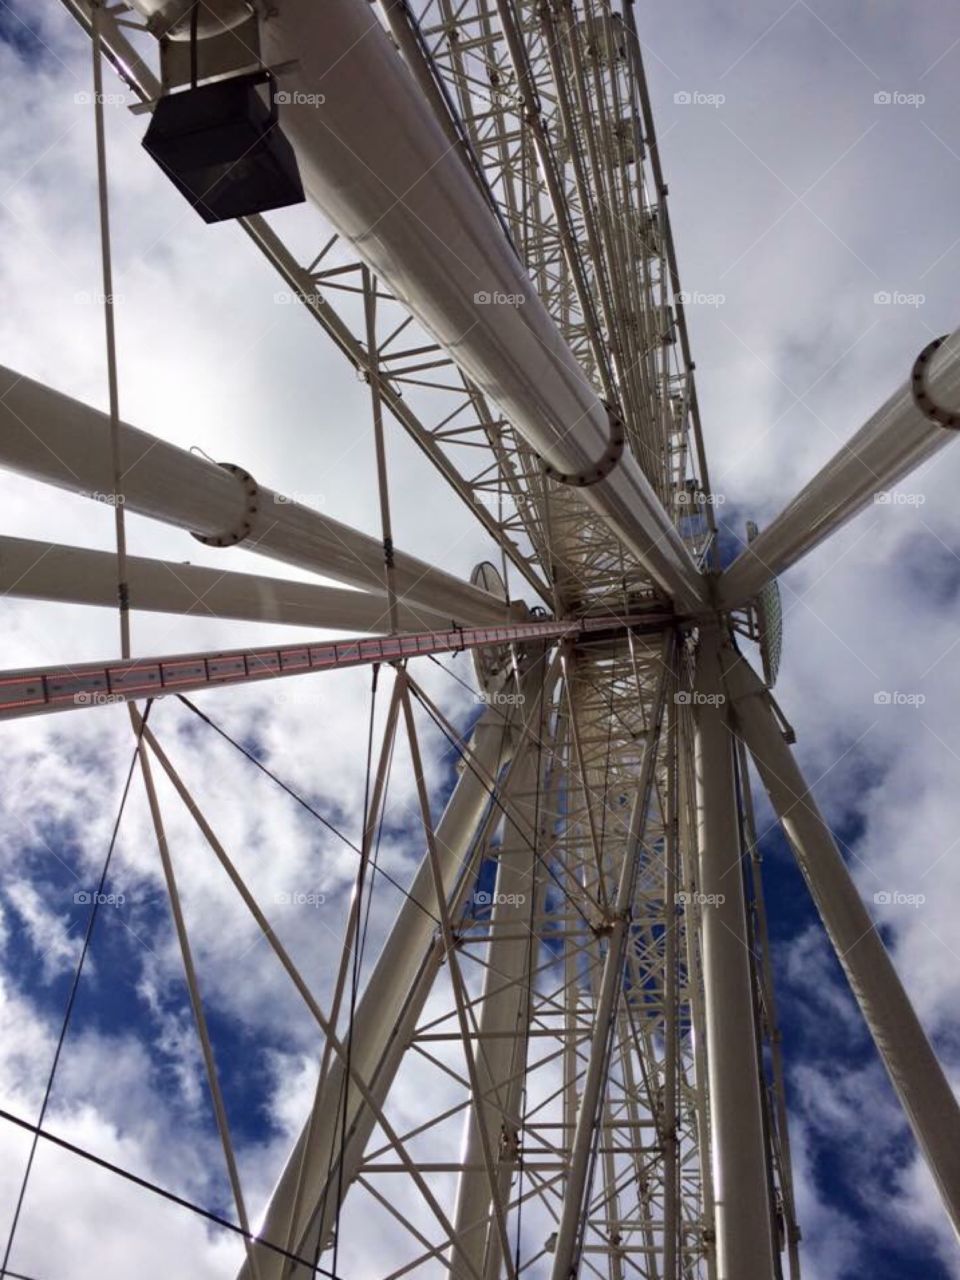 The Wheel at Pigeon Forge